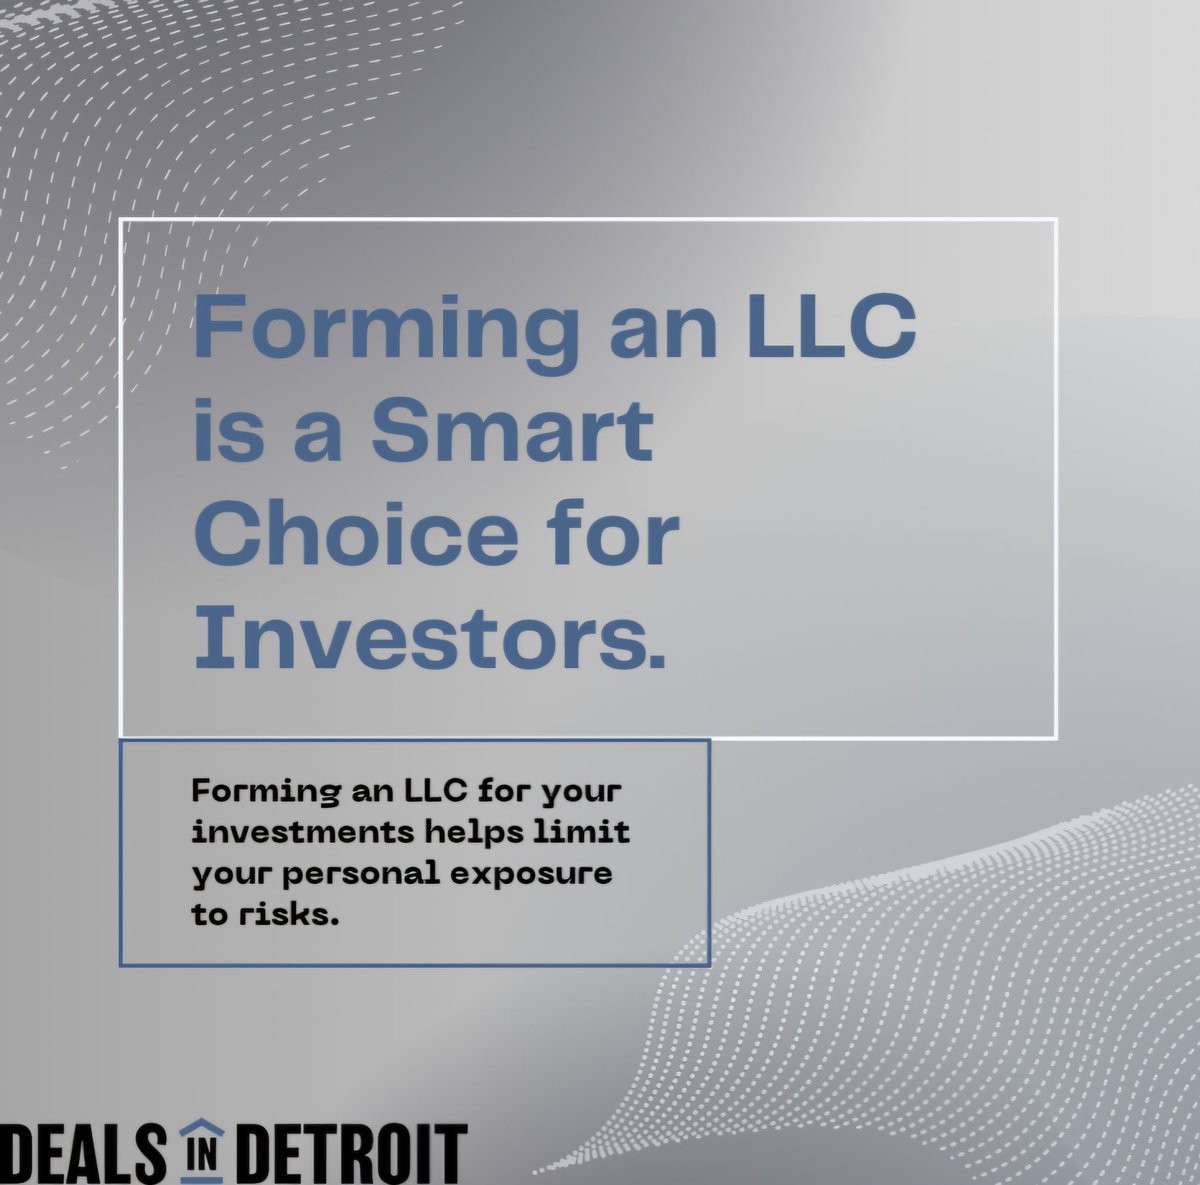 If you're an investor, protect yourself AND your investments by forming an LLC to limit your risk exposure 👊

#Detroit #metrodetroitrealestate #investmentpurchases #investmentproperty #buildwealth #buyersmarket #buydetroithouses #Detroitinvestment #detroitrealestate #investinyou